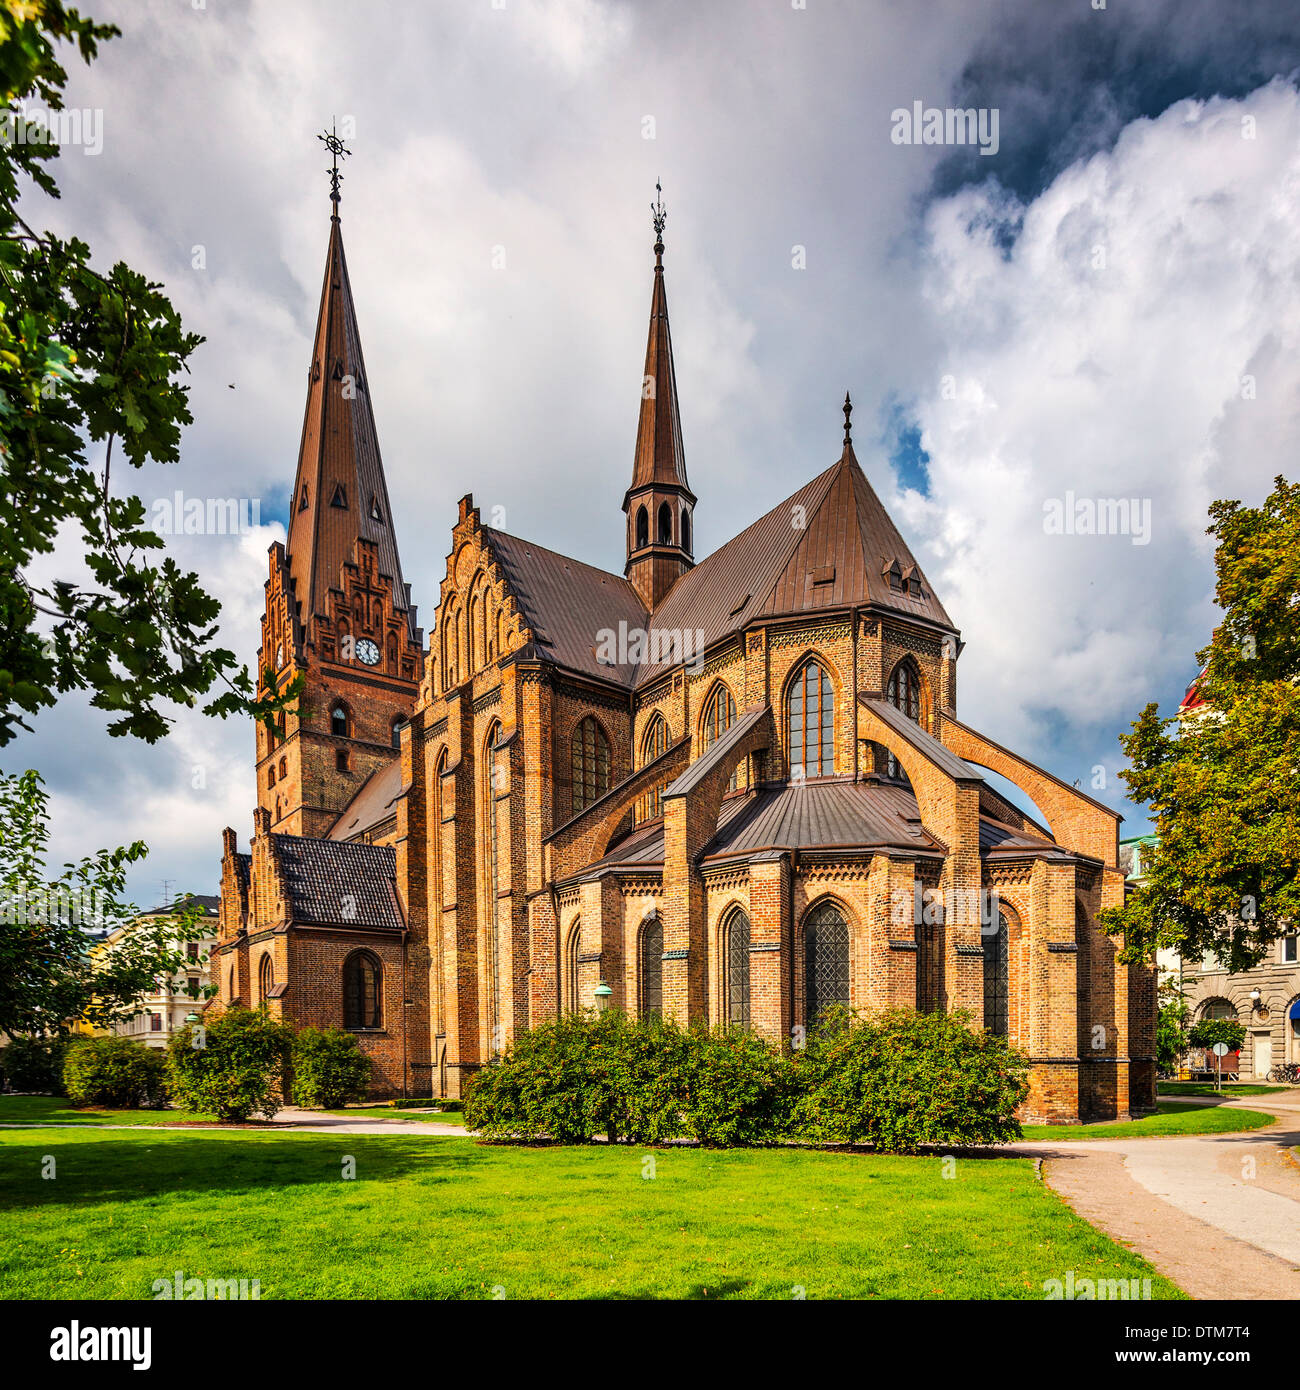 Church of Saint Peter in Malmo, Sweden. Stock Photo